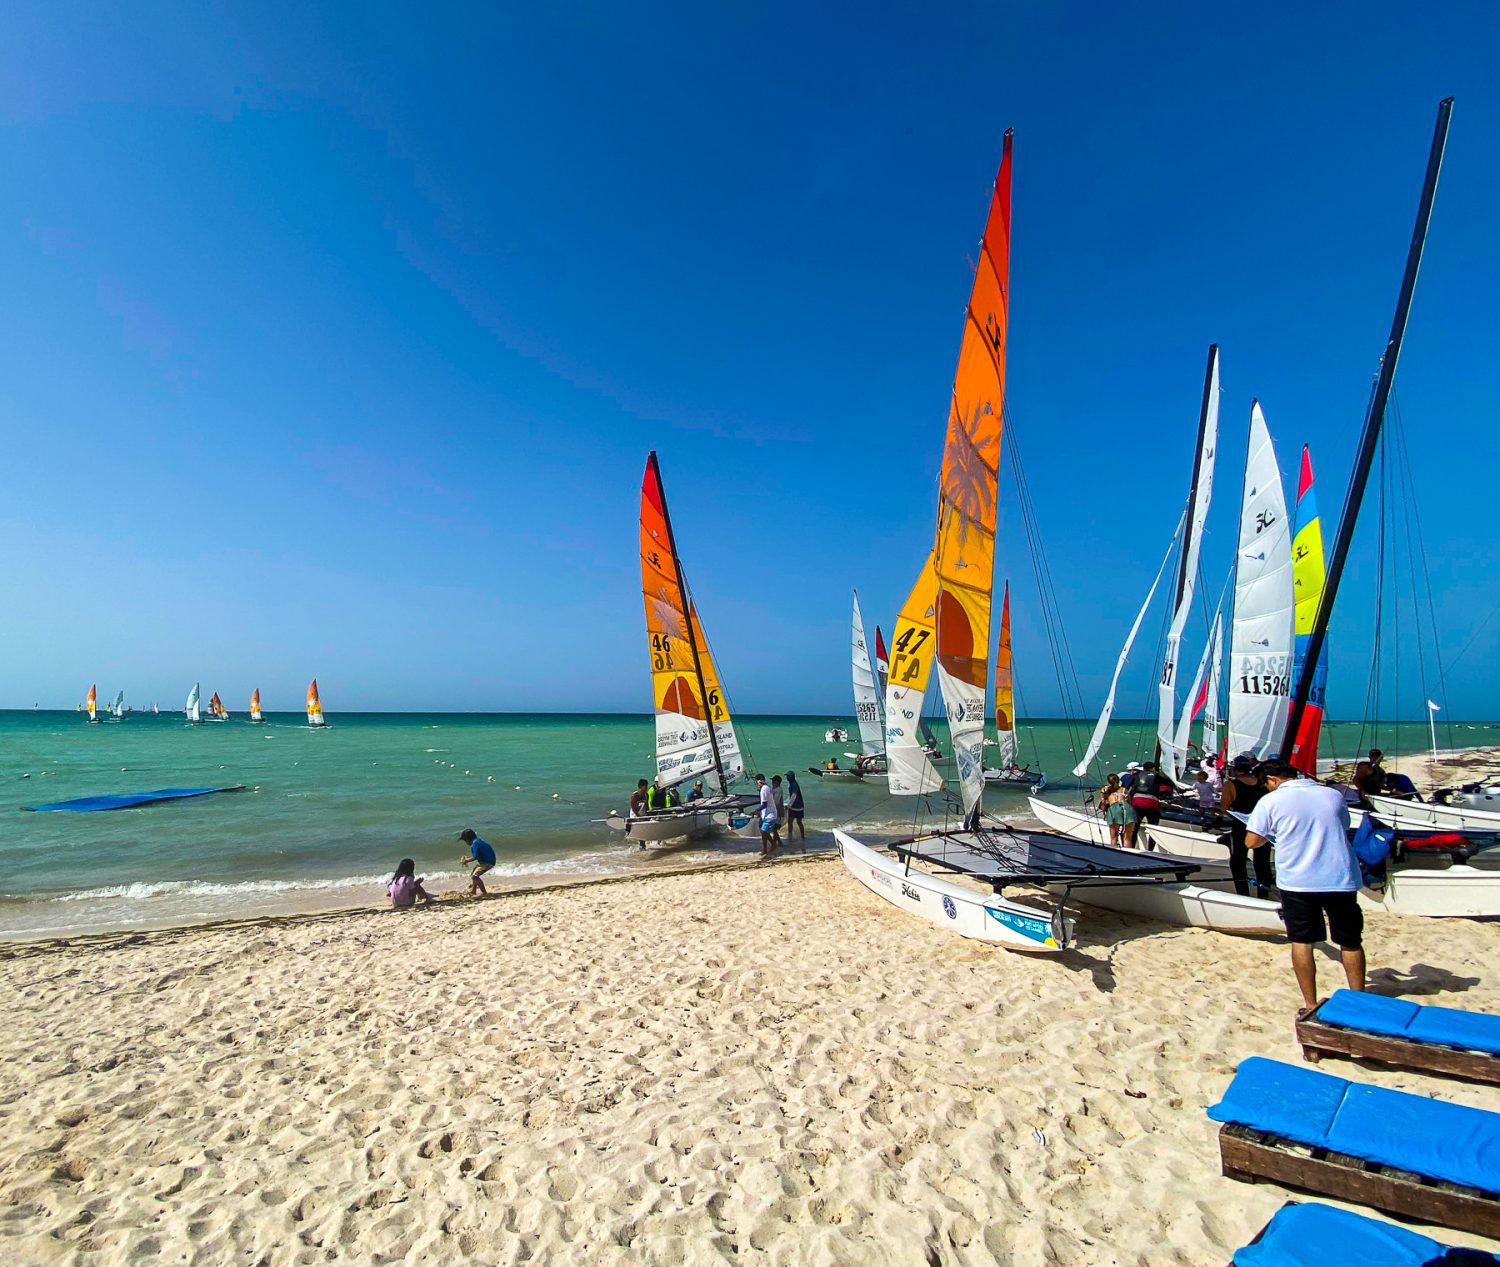 Sailboats began to land on the beach all around them!